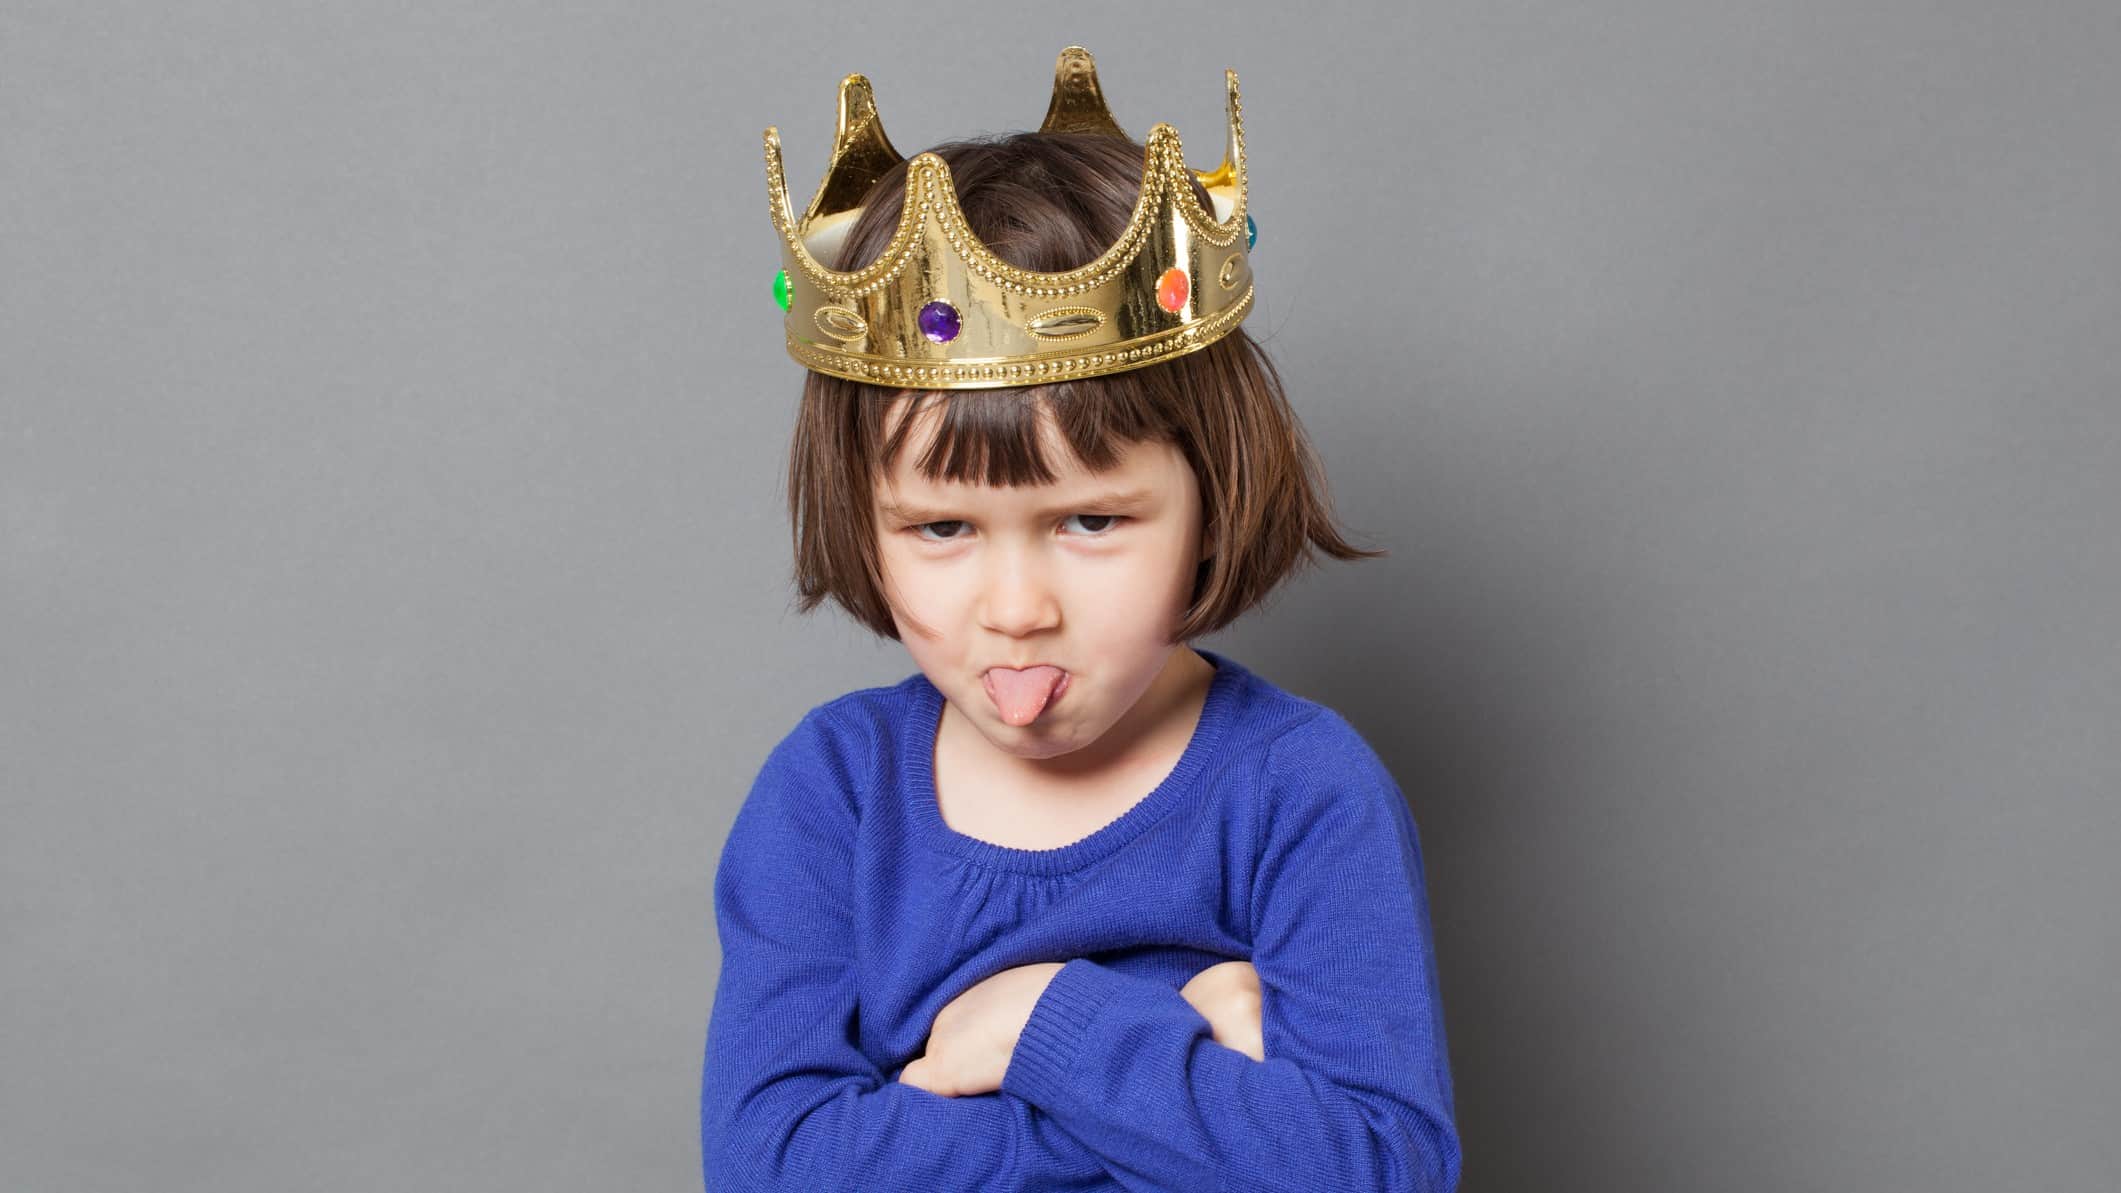 A little girl wearing a gold crown sulks and pokes her tongue out.